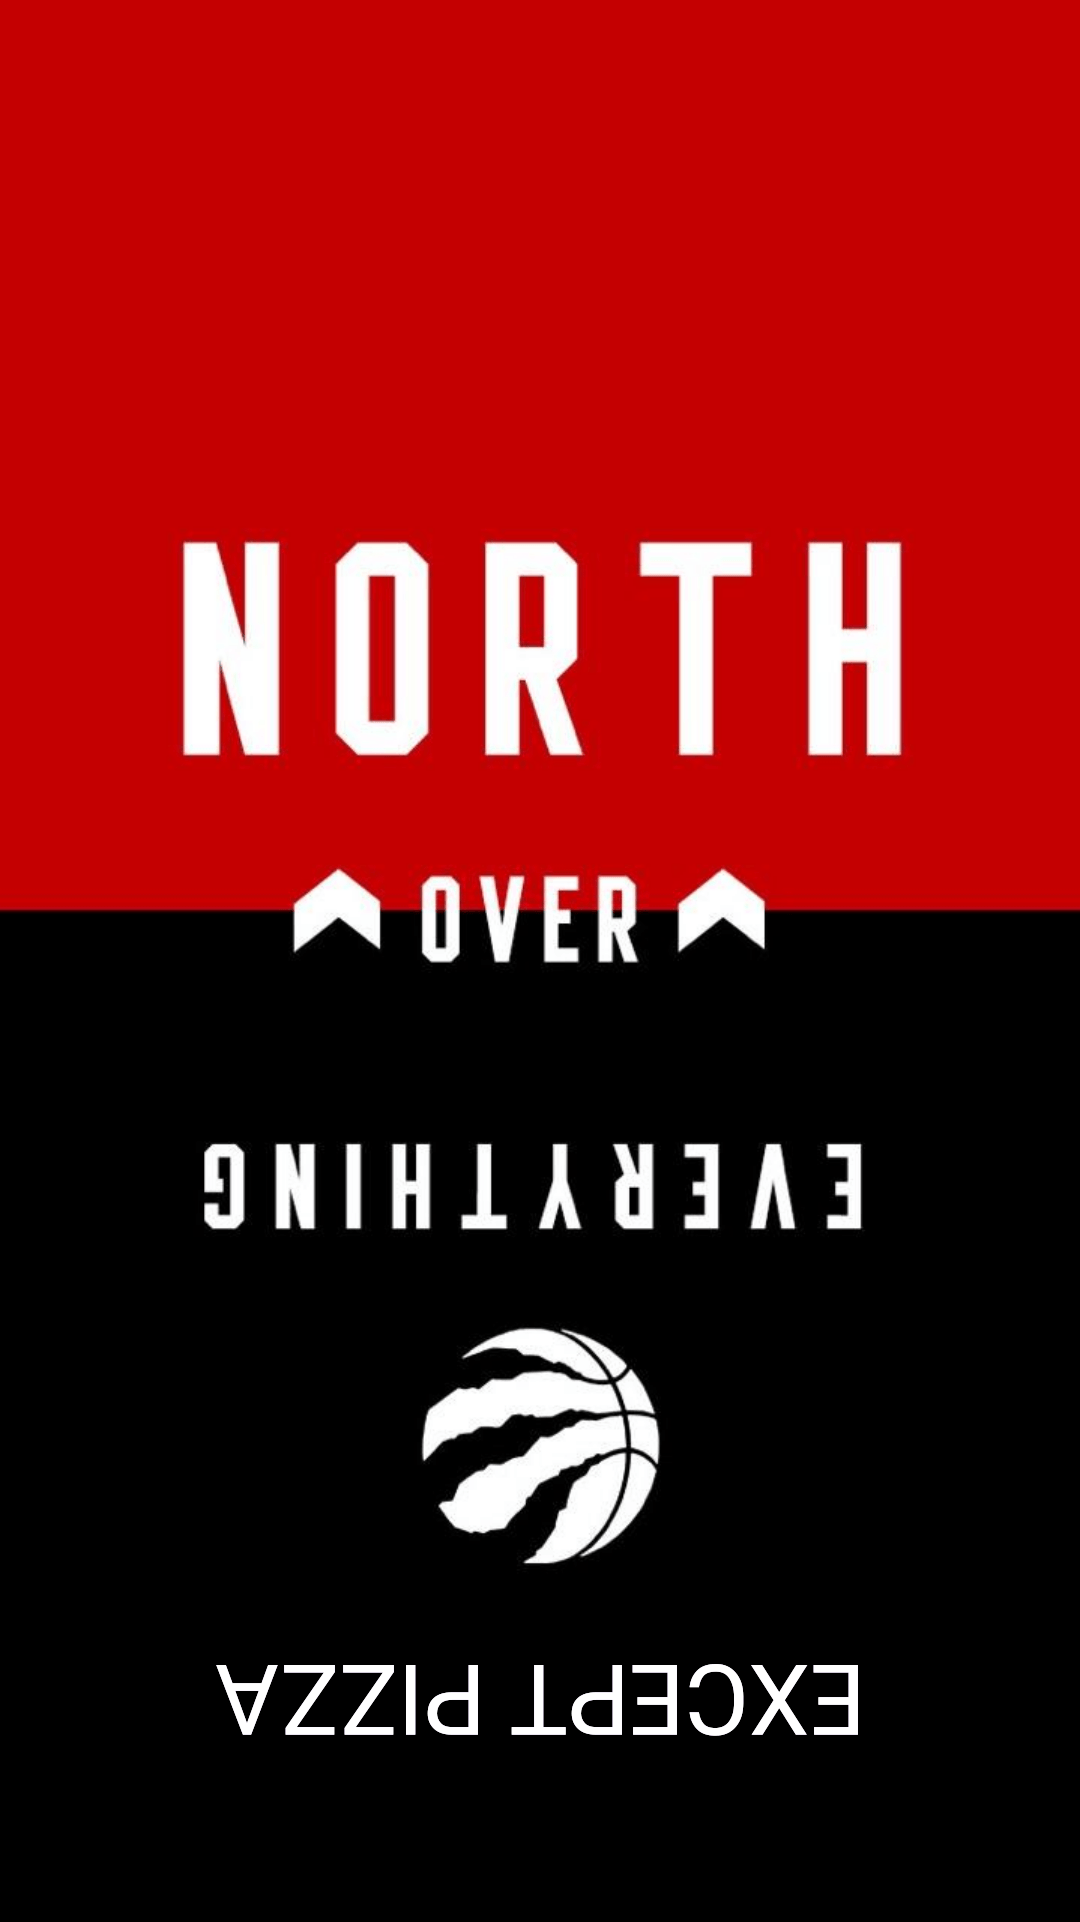 North over everything wallpaper I made a few weeks back, its